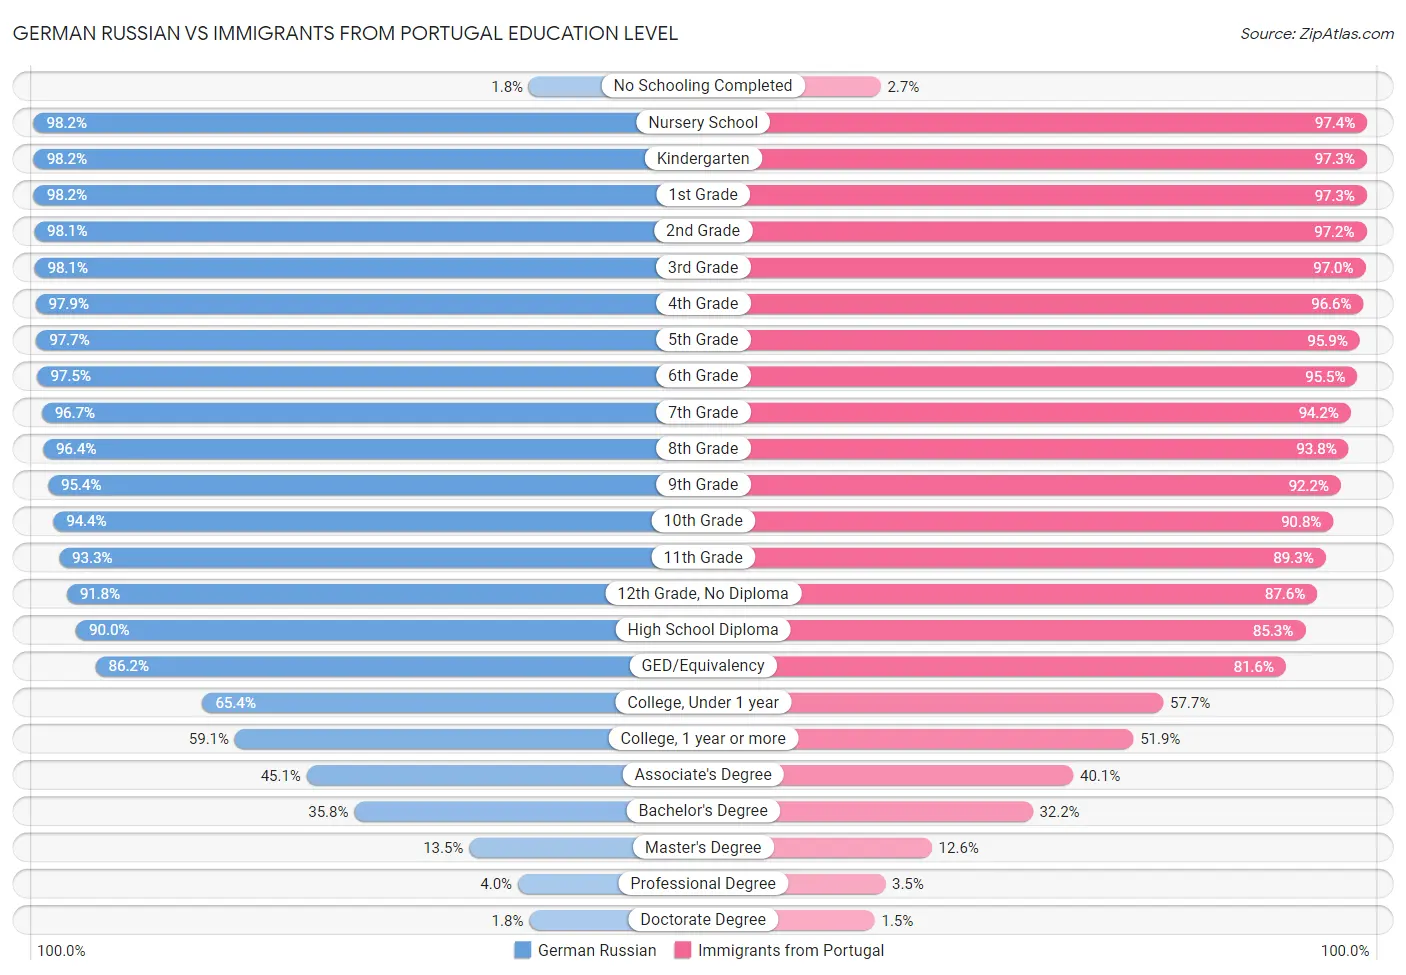 German Russian vs Immigrants from Portugal Education Level